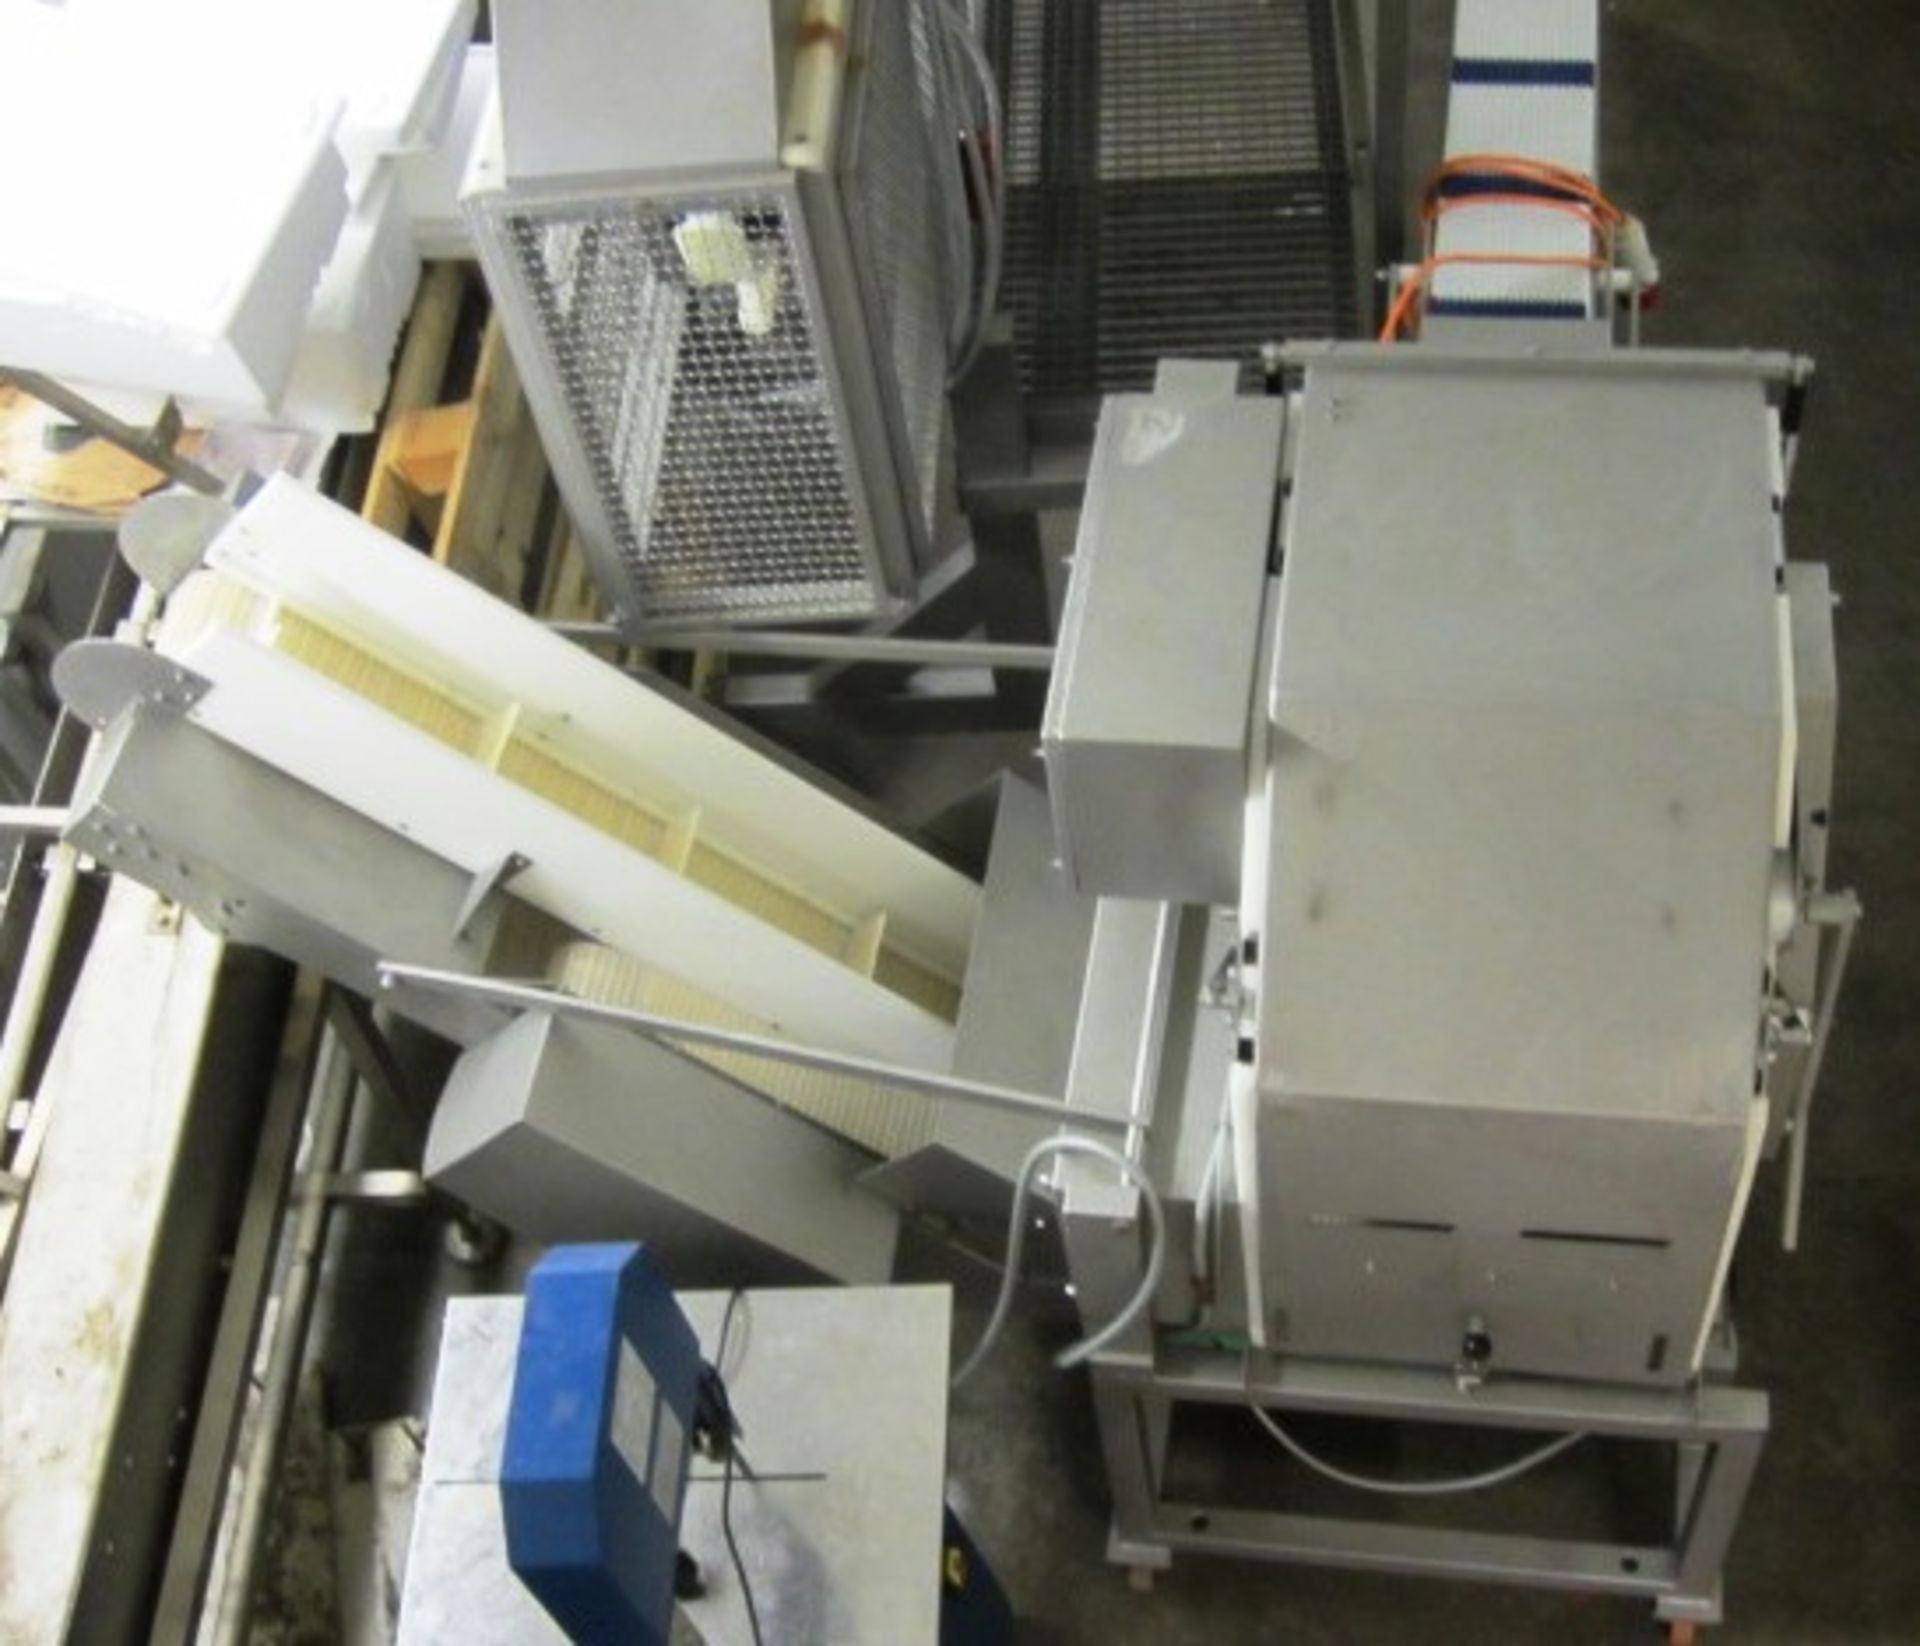 Steen Stainless Steel mobile chicken breast skinning machine, type ST 650 / 3010A (2010) with - Image 3 of 11